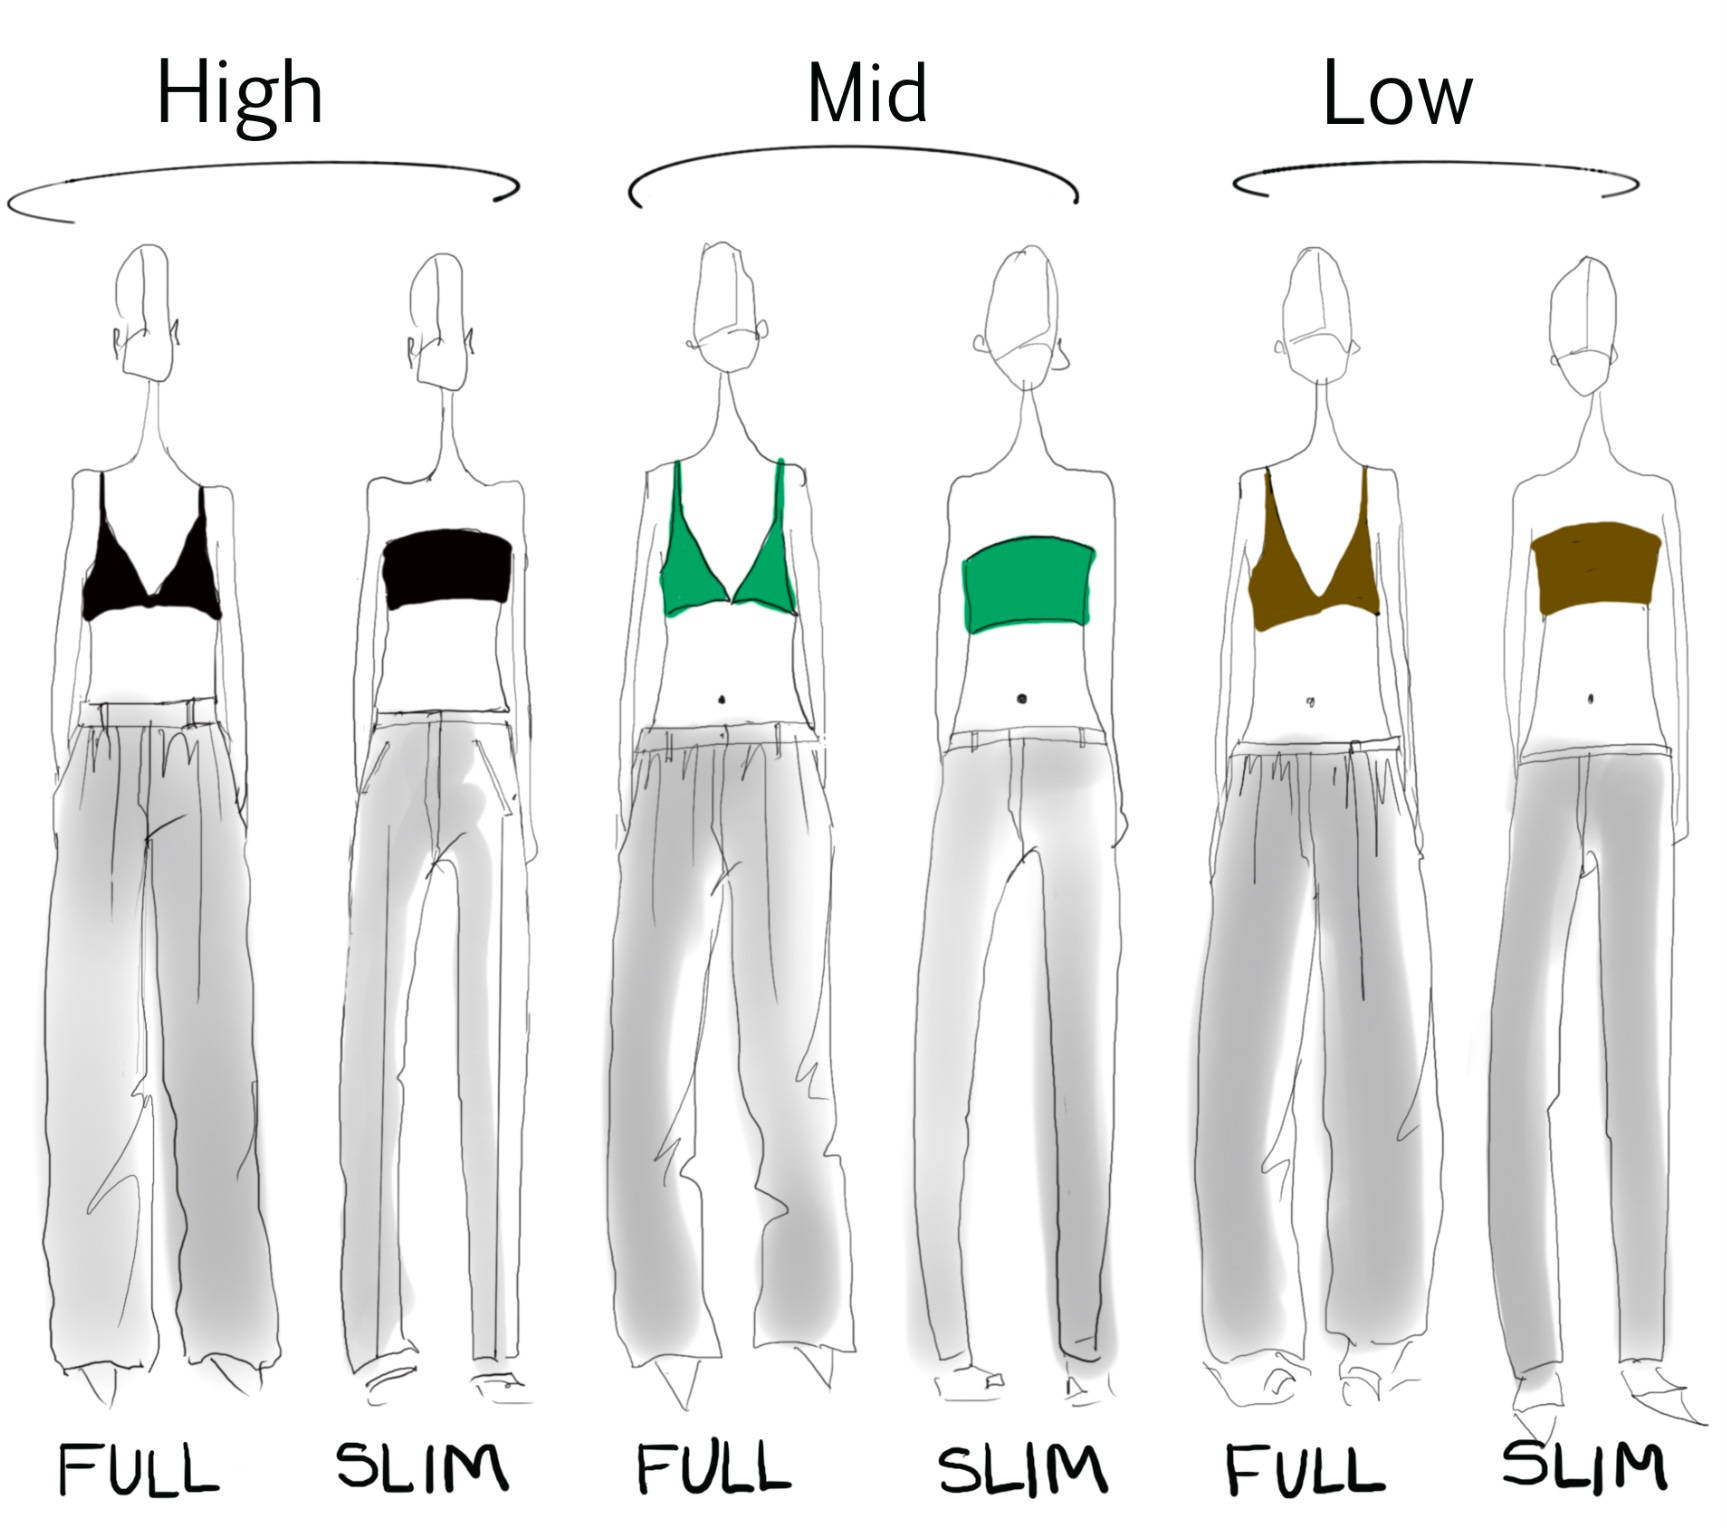 six illustrated women in high waited, mid waisted, low wiasted full and slim pants